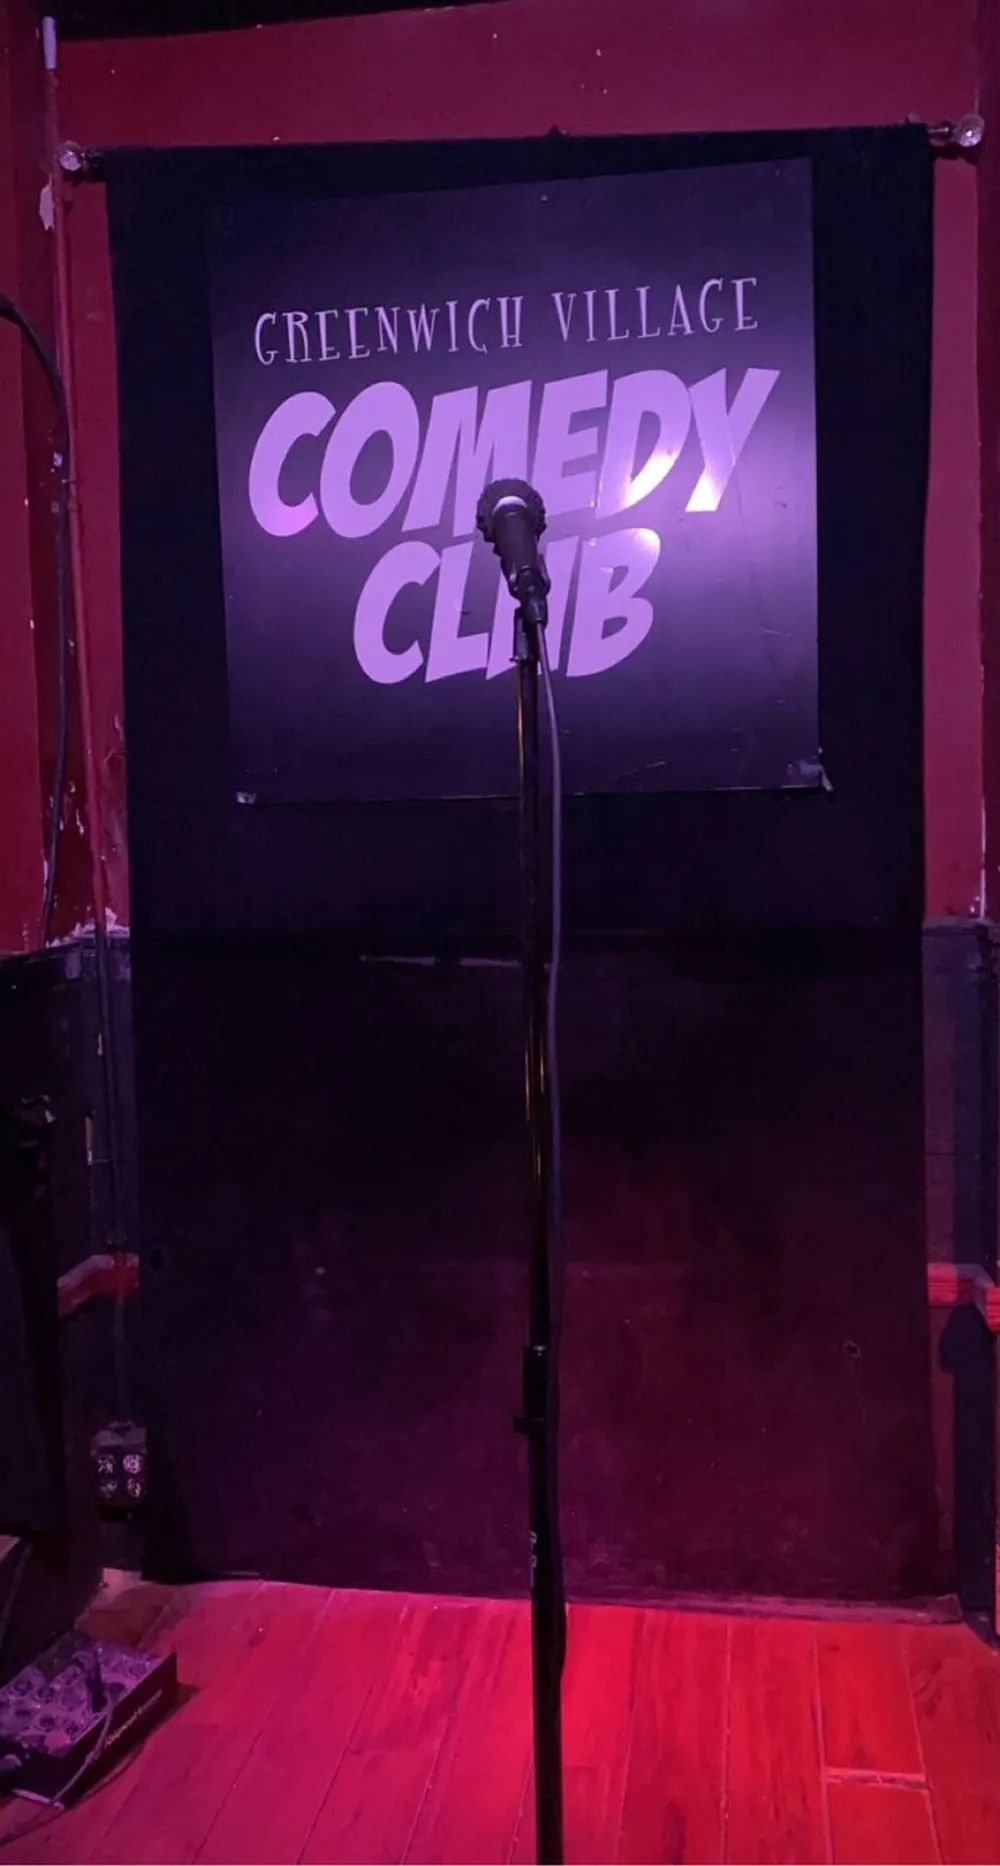 A stage with a microphone awaits a performer at the Greenwich Village Comedy Club under a spotlight